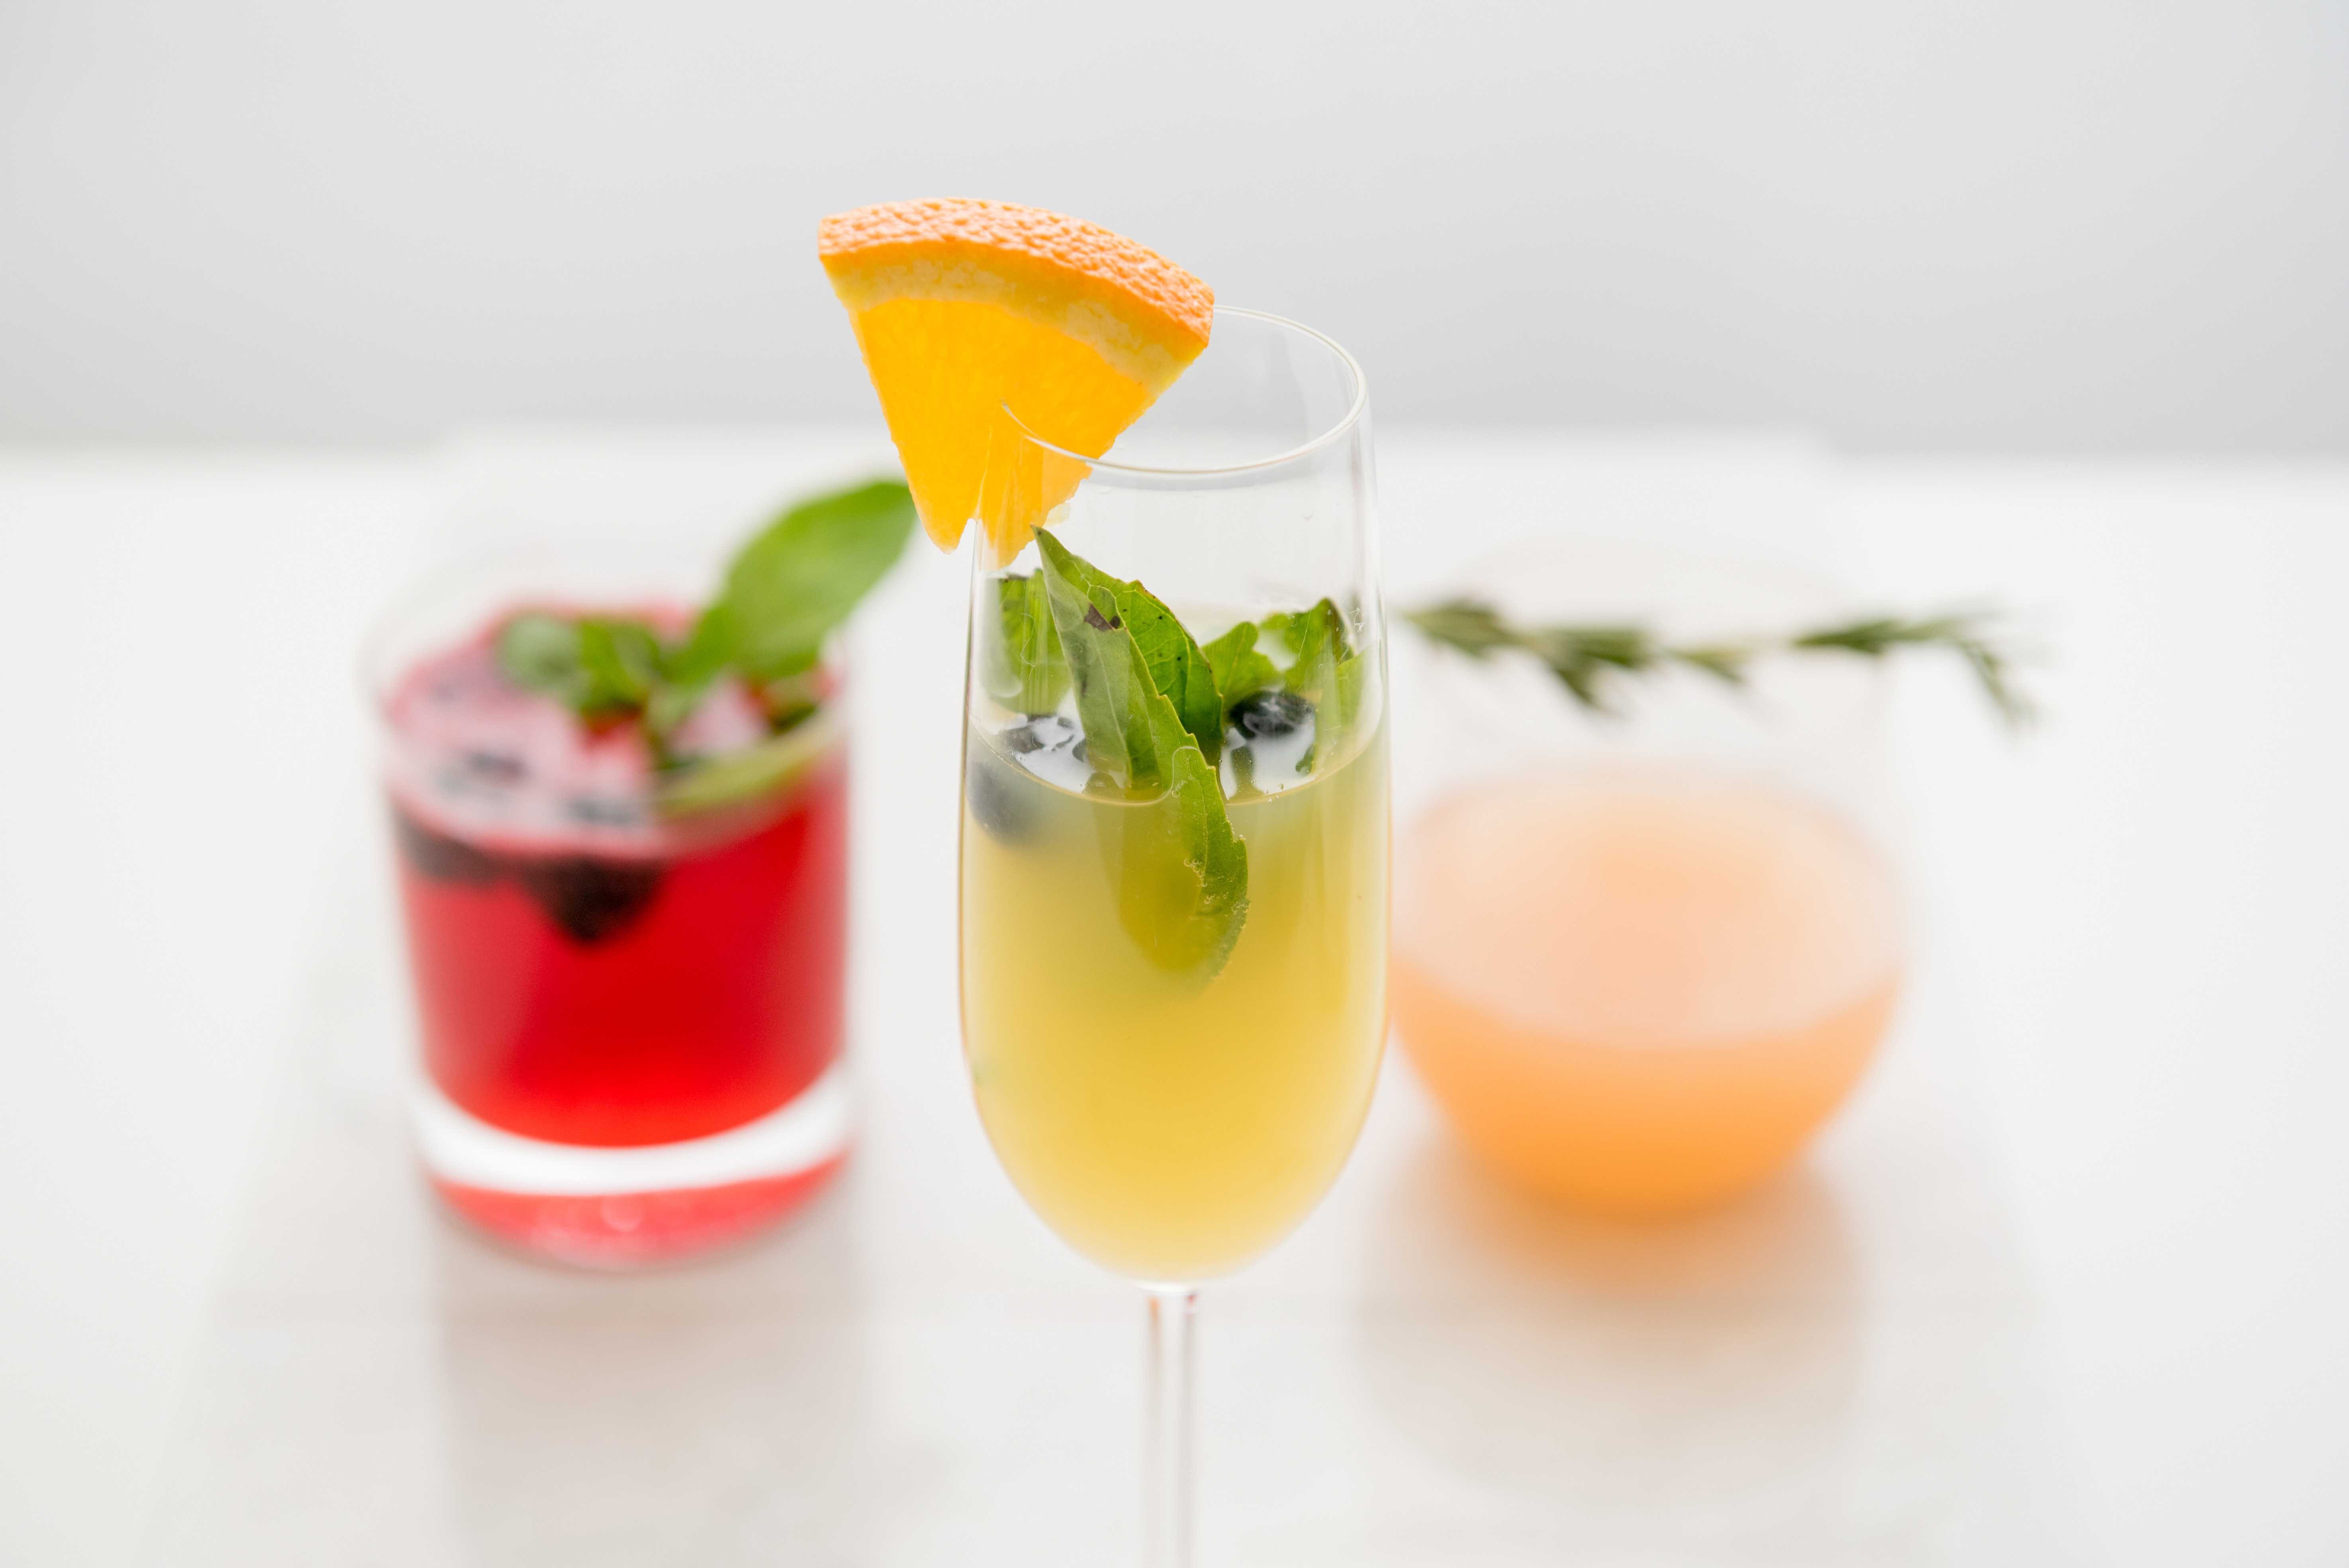 Easy-To-Make Mocktail Recipes by Molly Mills